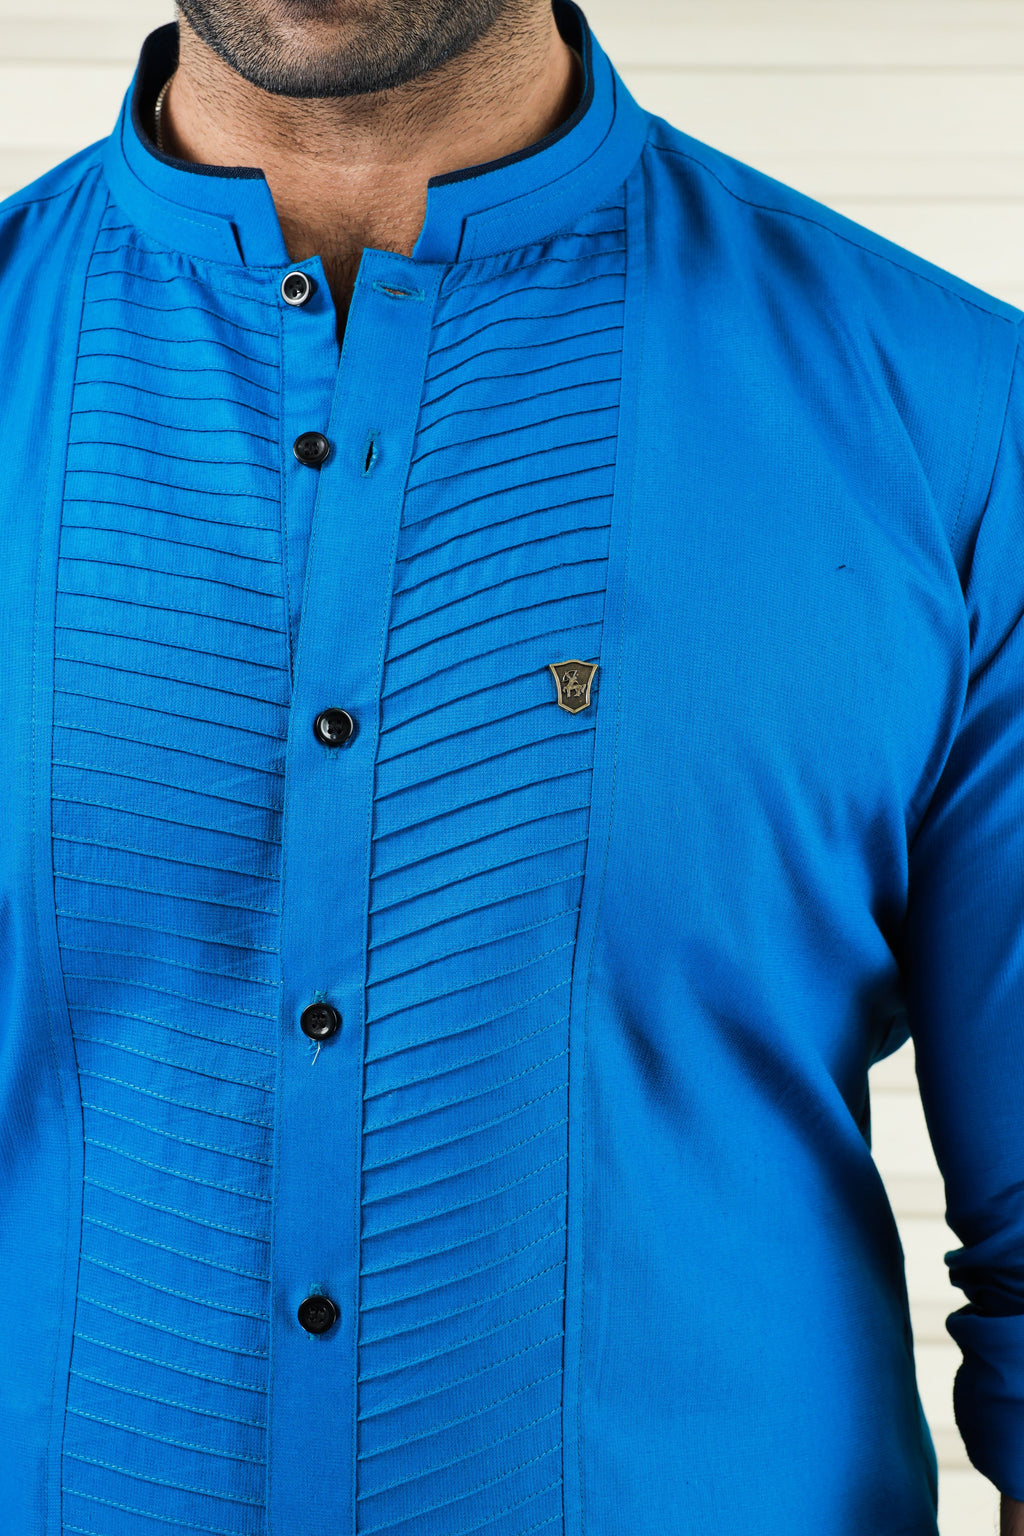 Teal Blue Chinese Collar Shirt with Graffiti Blue Detailing on Neck P   archerslounge